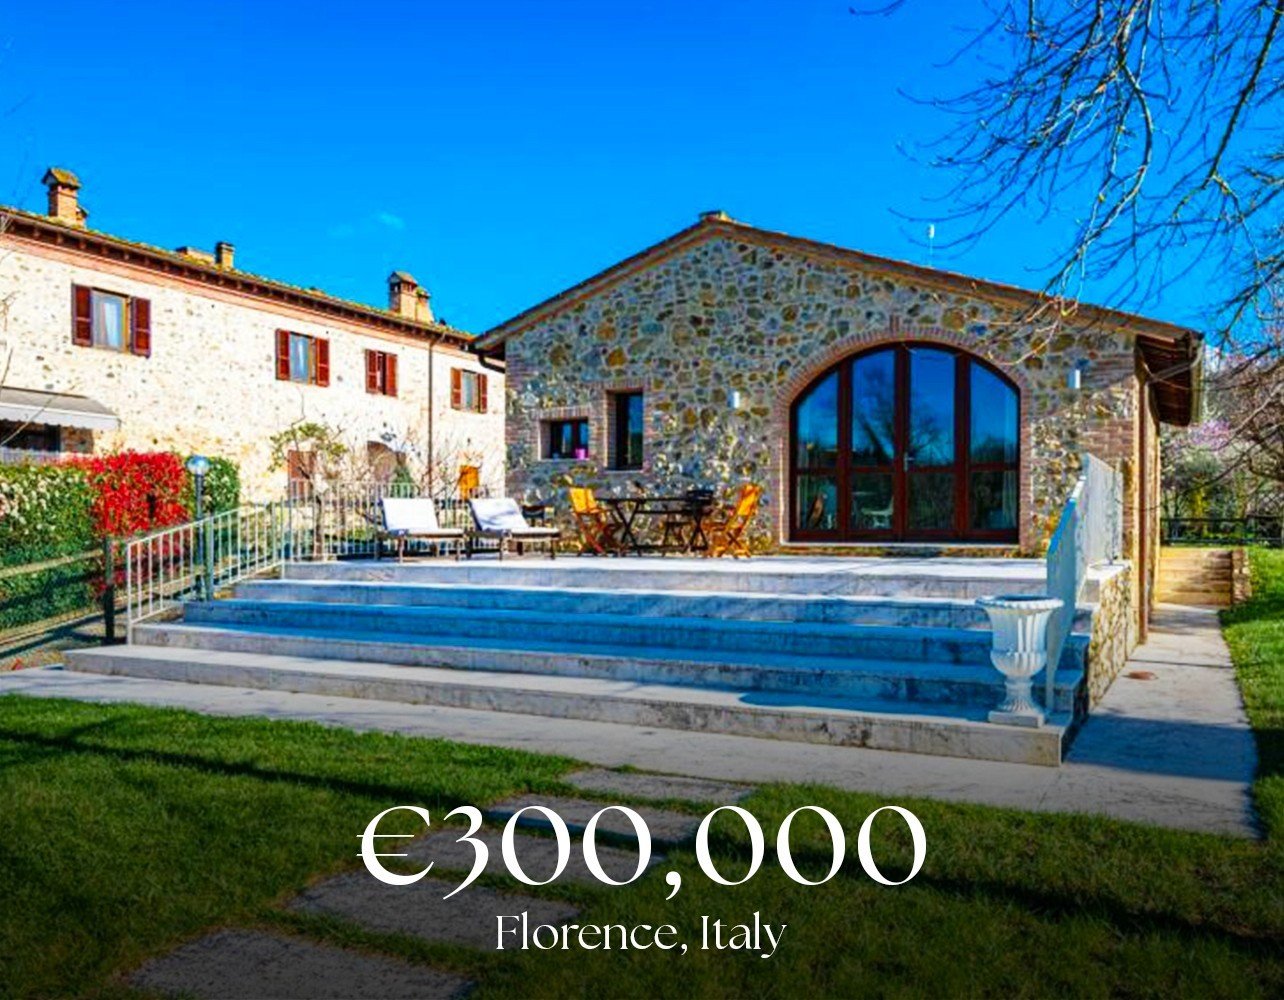 Did anyone order an idyllic retreat in Florence? Stretching the usual budget takes us where this charming 70 sqm villa awaits! Embrace the rustic elegance of this fabulously renovated house, complete with a spacious open living area, a well-appointed